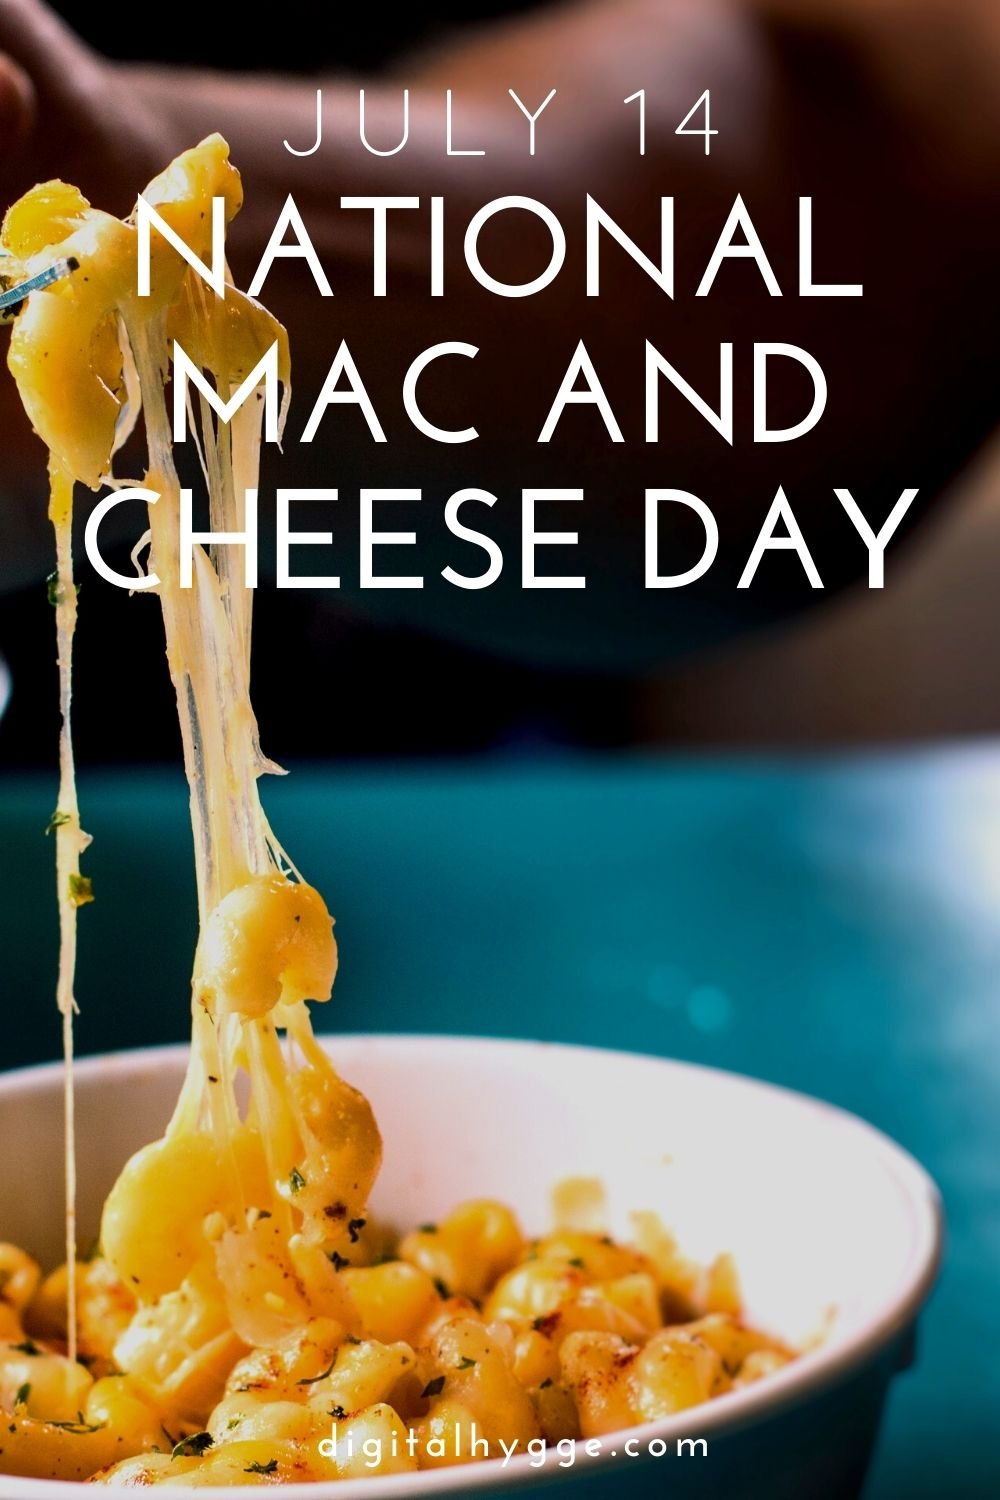 National Mac and Cheese Day Digital Hygge